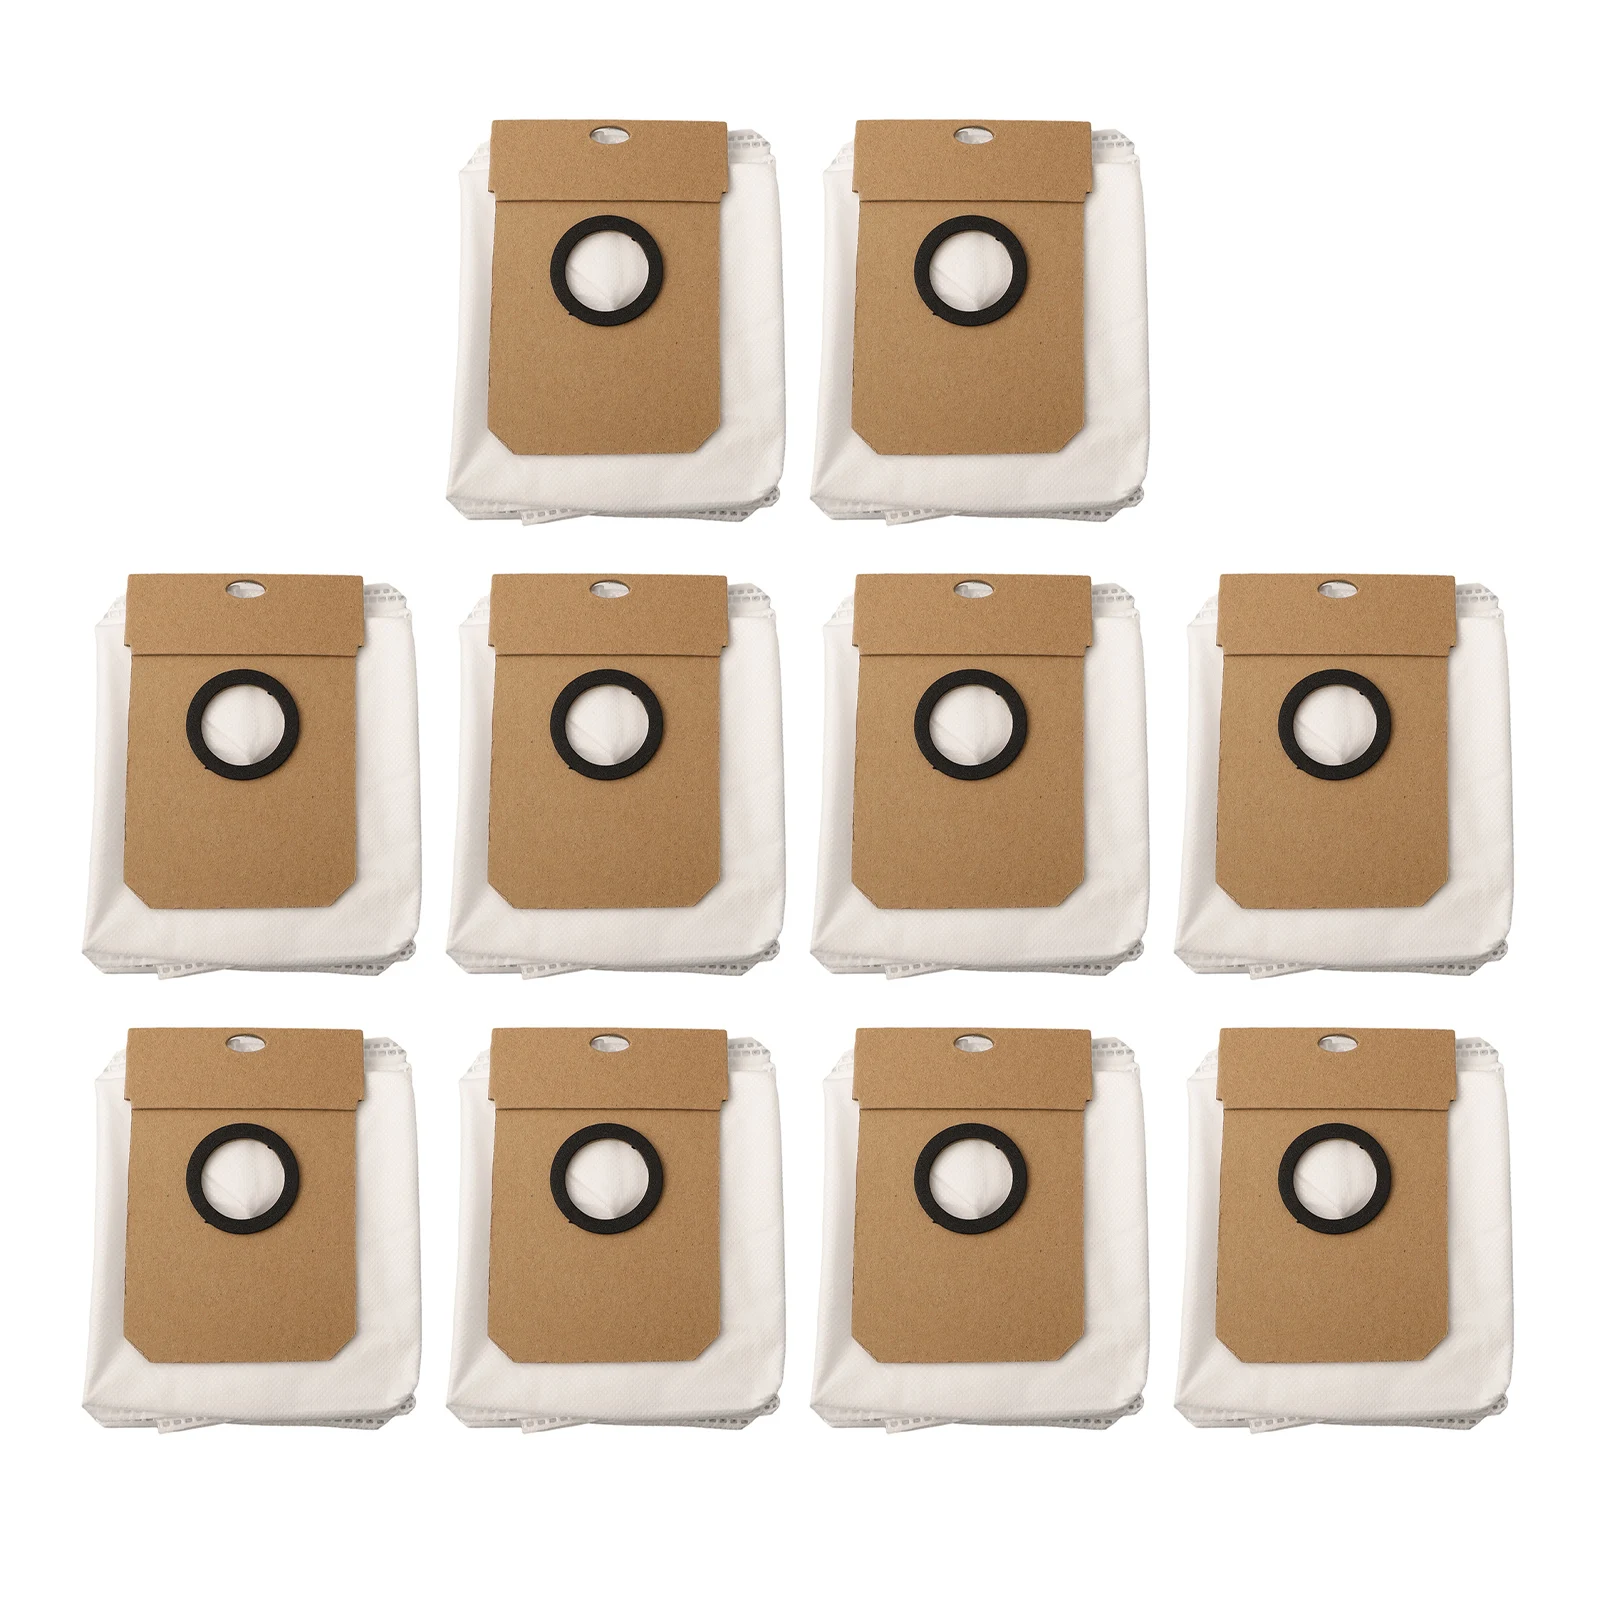 4/10pcs Dust Bags For Cecotec Household Cleaning Tools Accessories Vacuum Cleaner Replacement Parts For Conga 11090 4 10pcs mopping cloths clean mop cloth replace cloth cleaning pad for conga 7490 eternal genesis robot vacuum cleaner sweeper